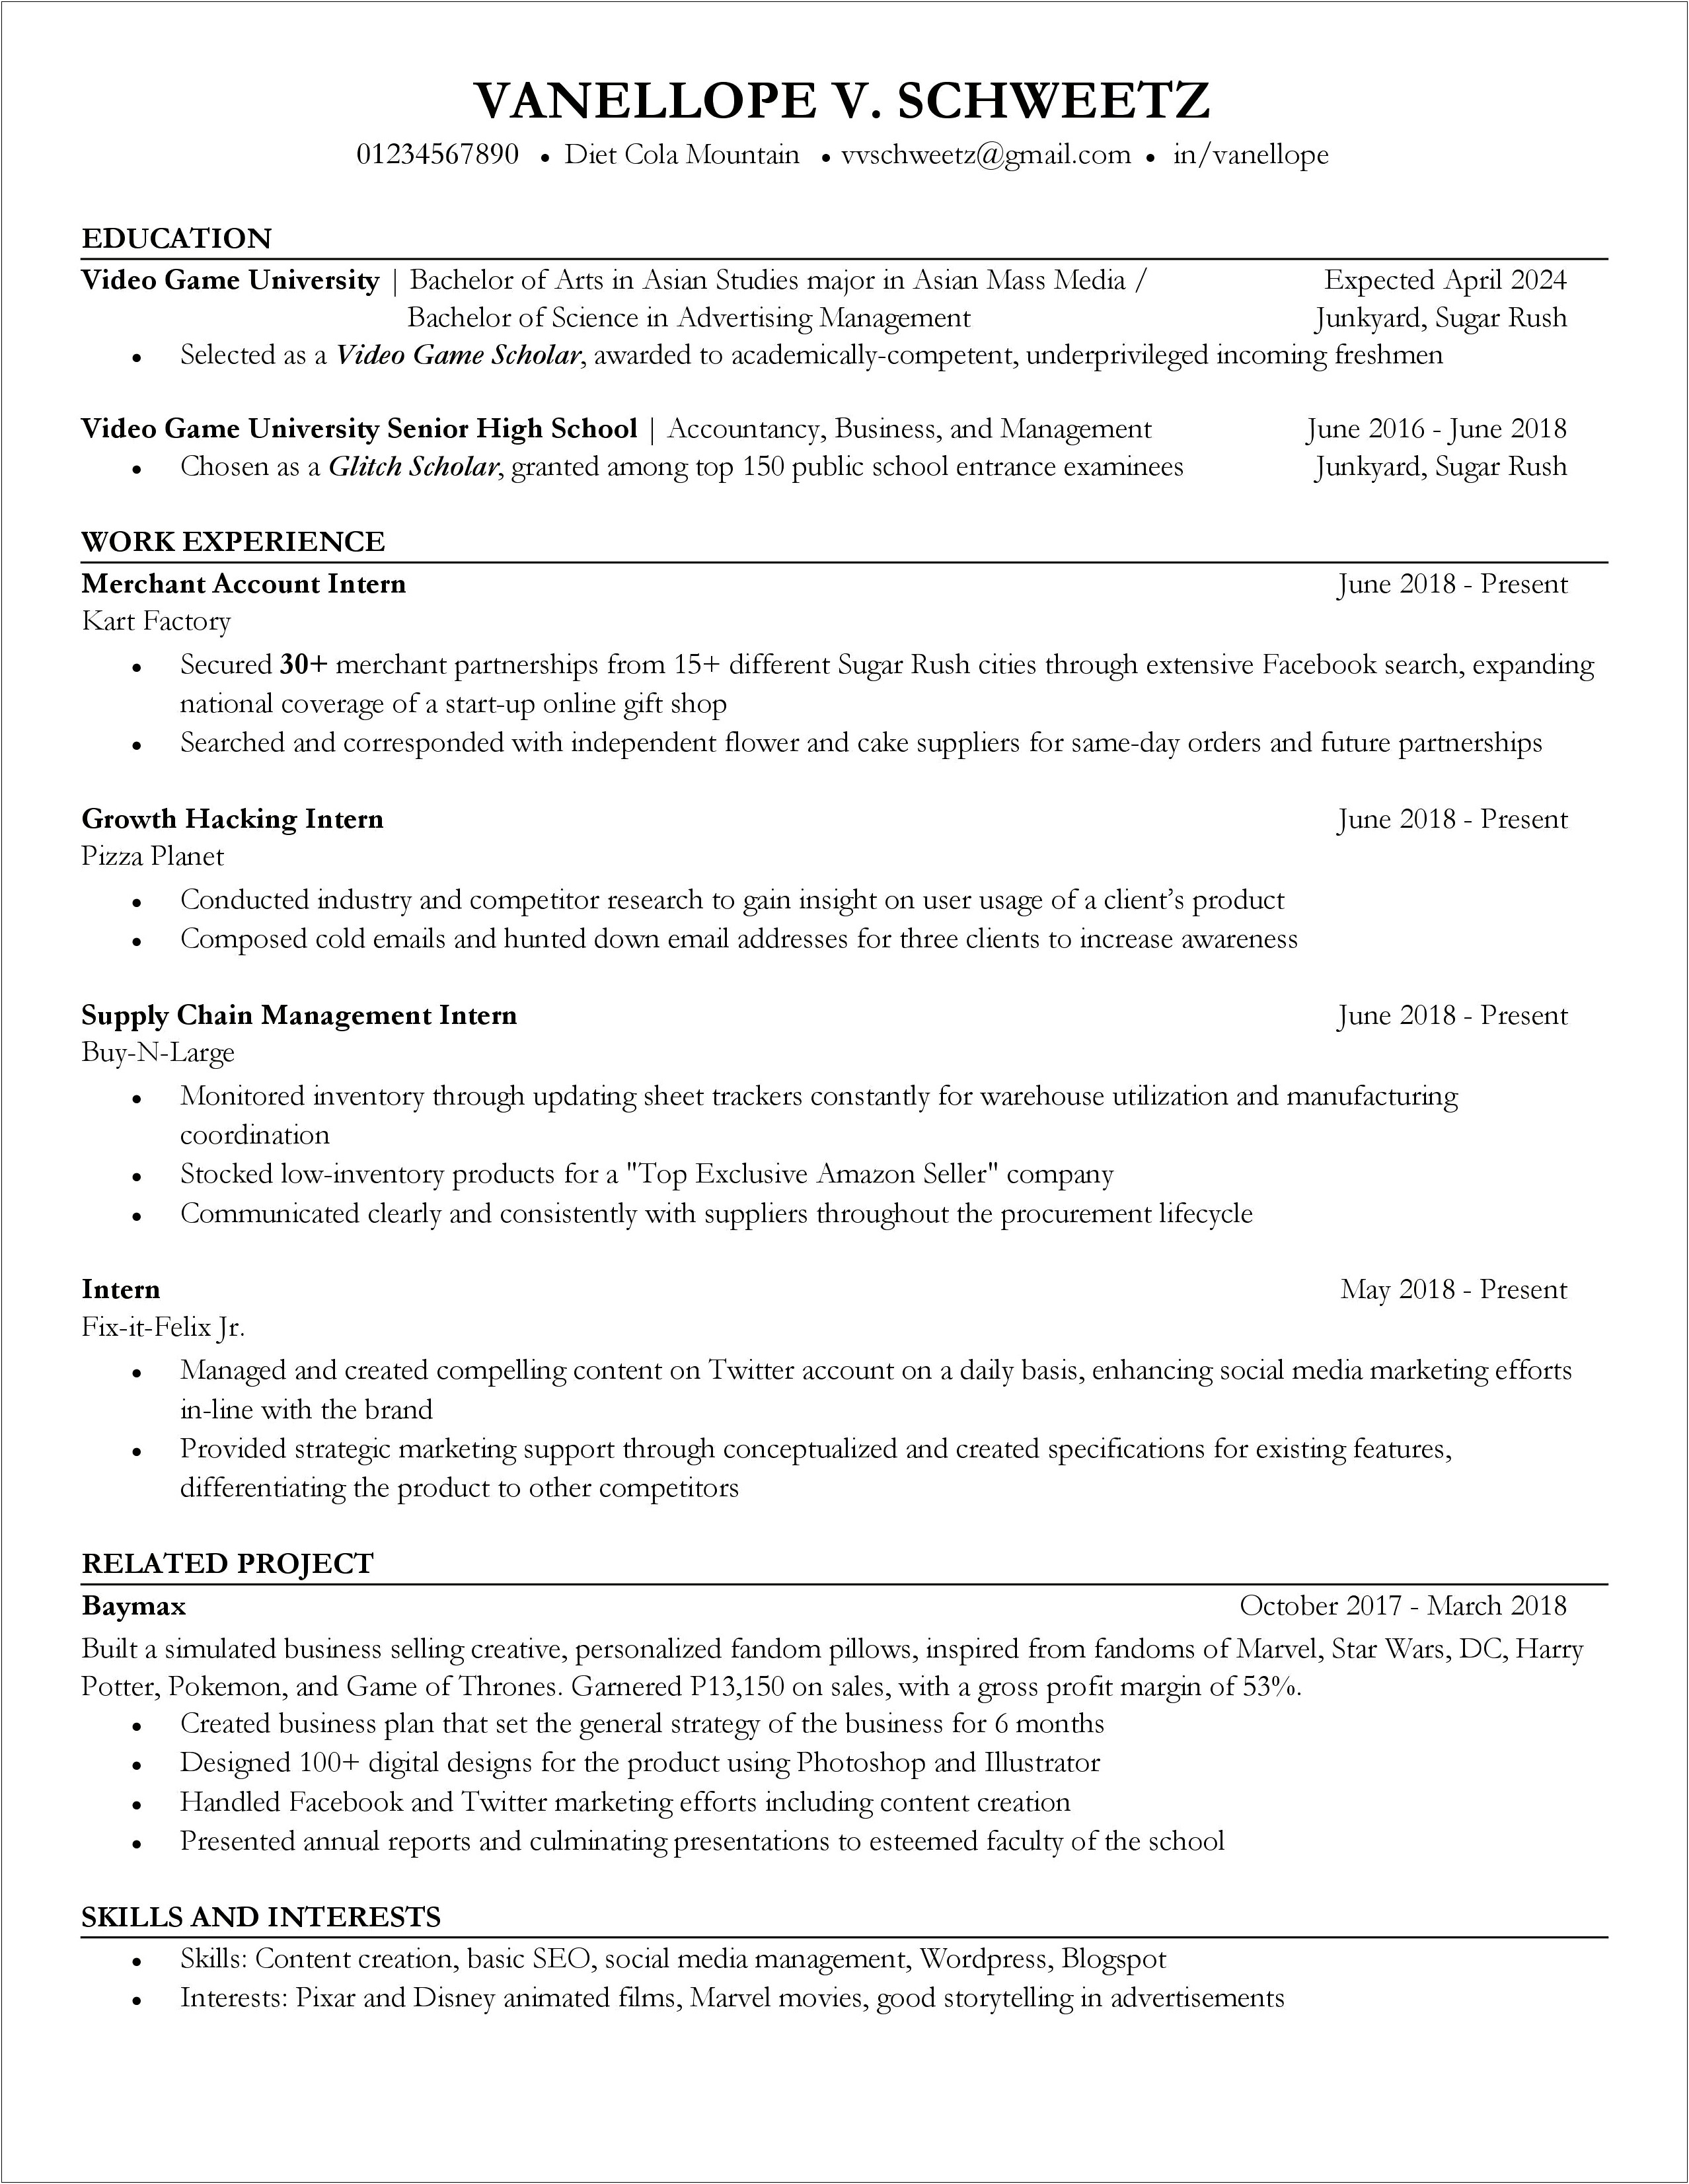 Amazon Independent Contractor Job Description For Resume